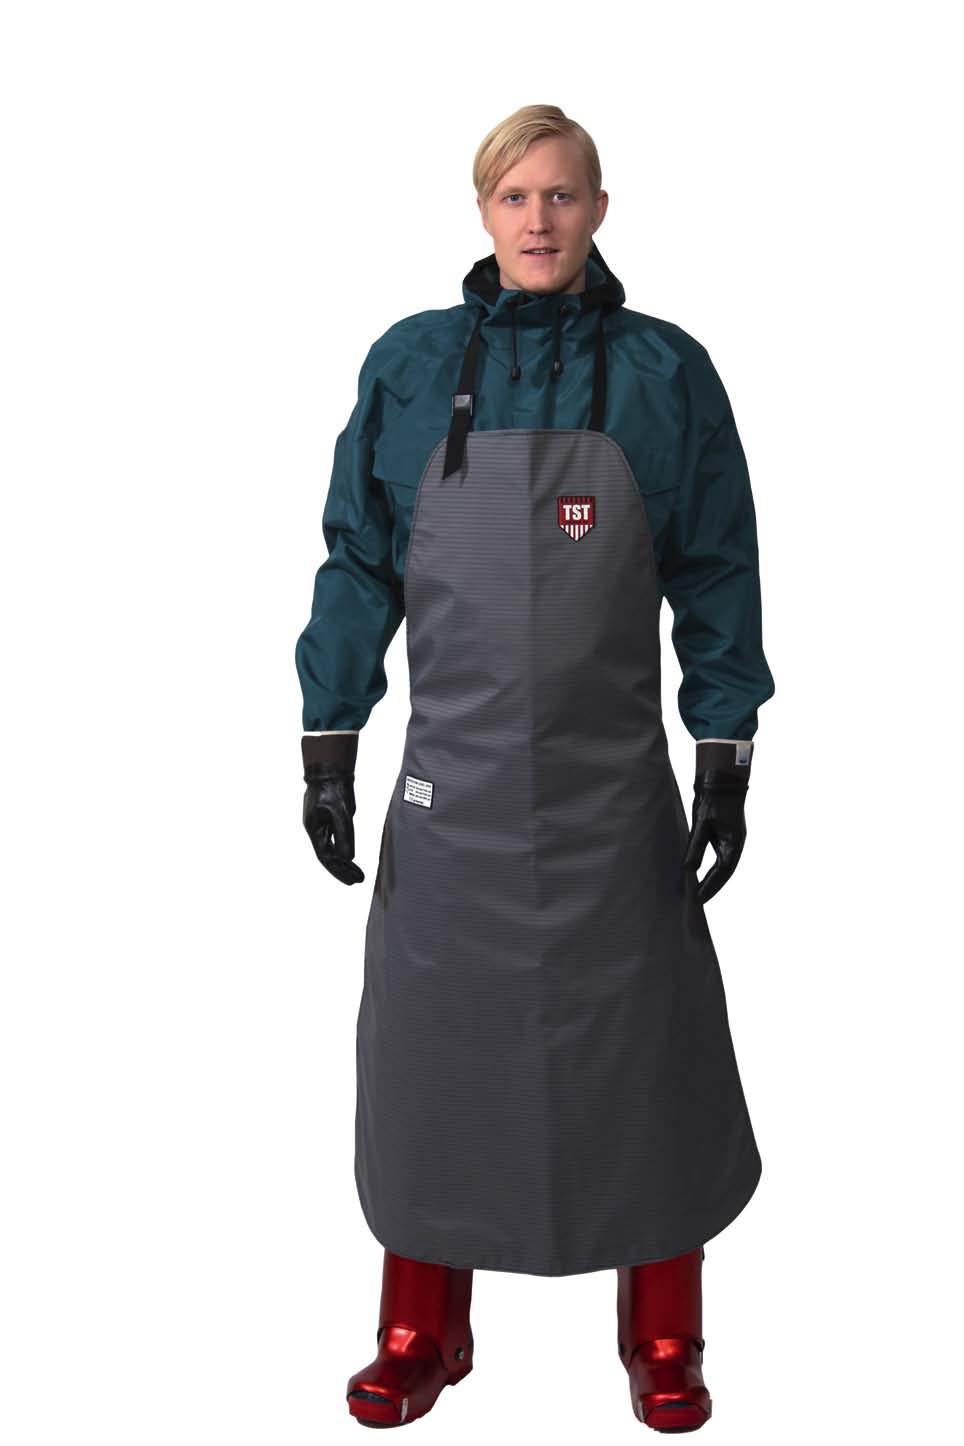 APRON The full area of the Apron has built-in protection. Good alternative protection in warm environments. The position of the Apron can be changed with the adjustable neckband.